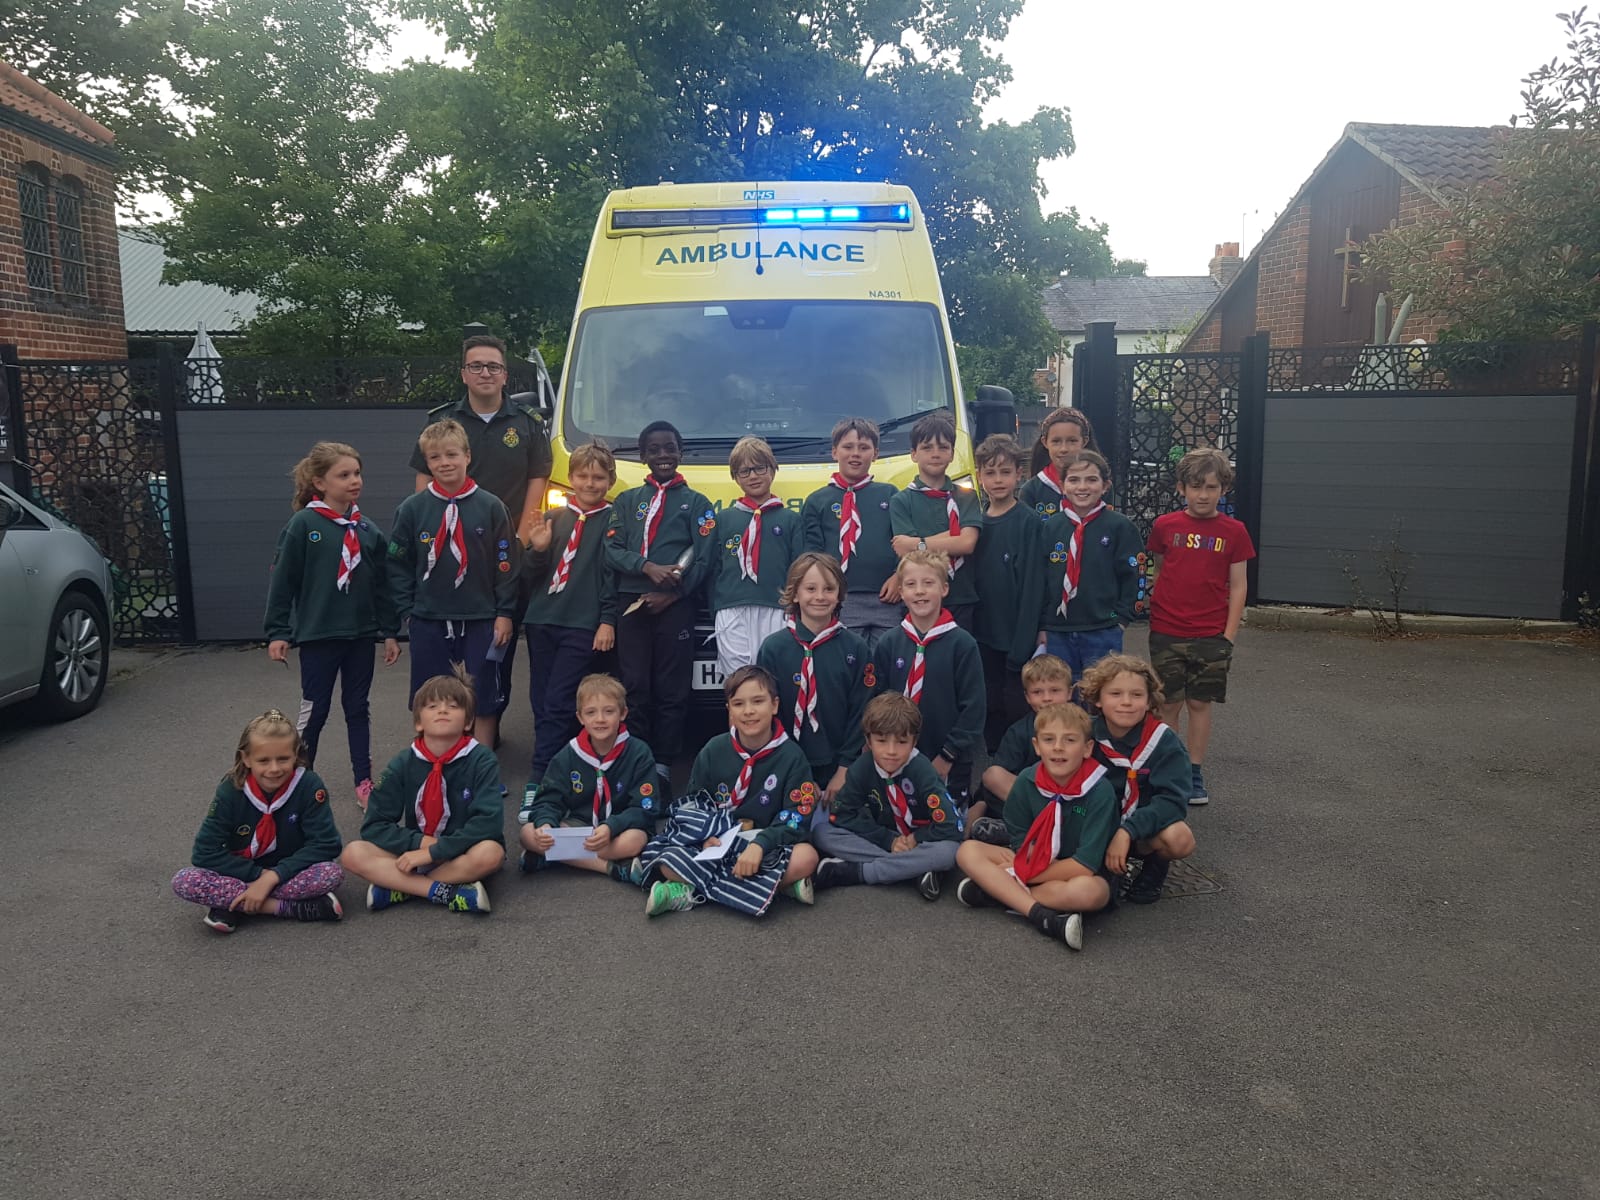 Scout and Cub Group in front of an ambulance vehicle